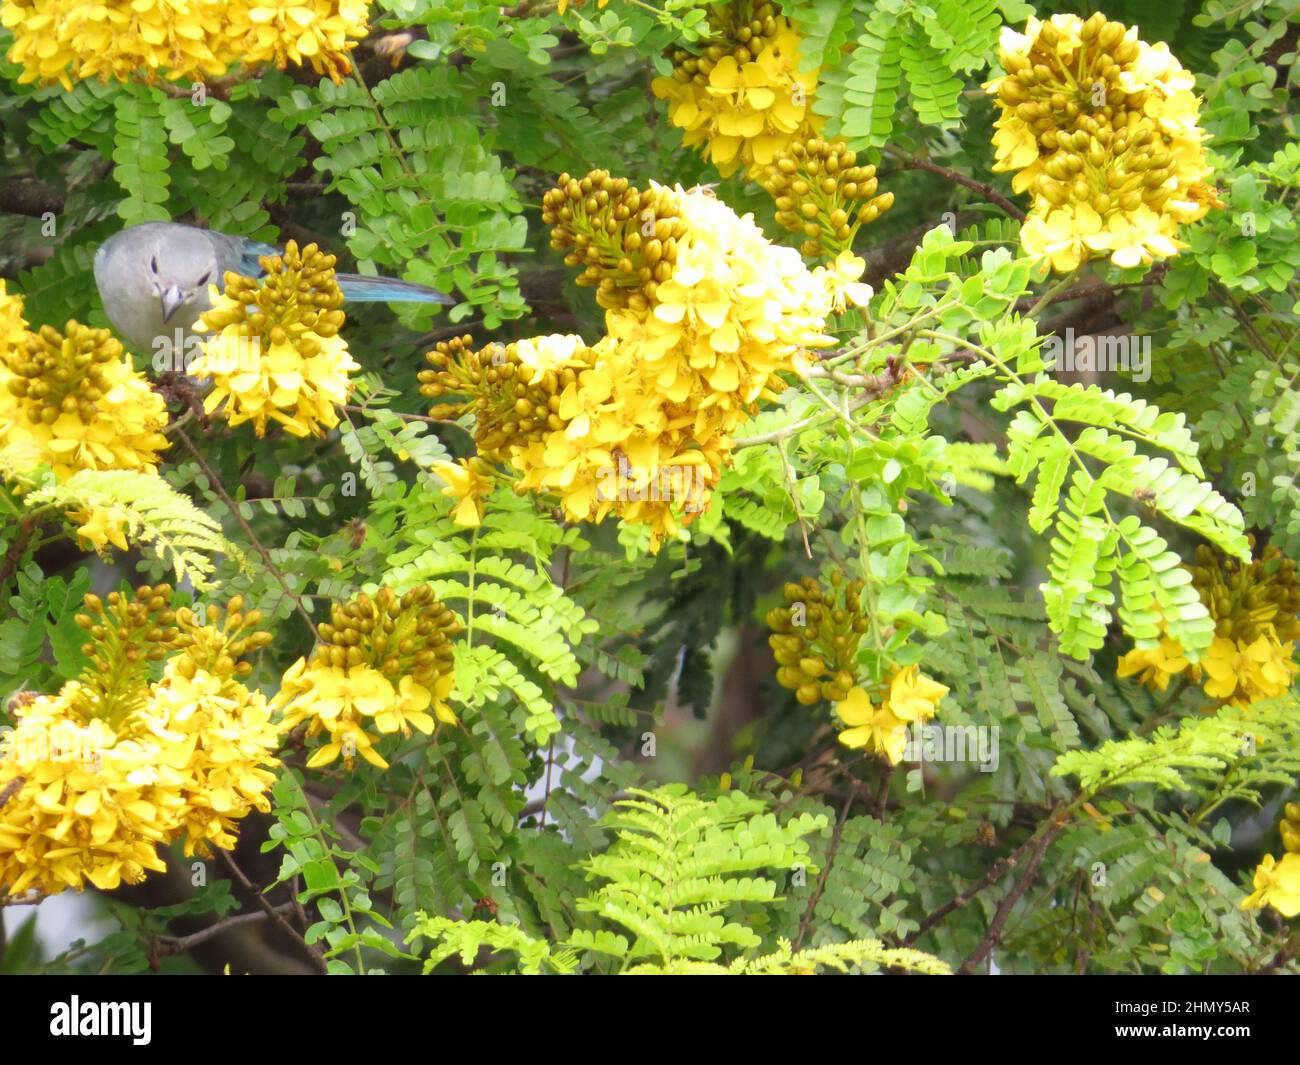 Sanhaço perched amid yellow flowers Stock Photo